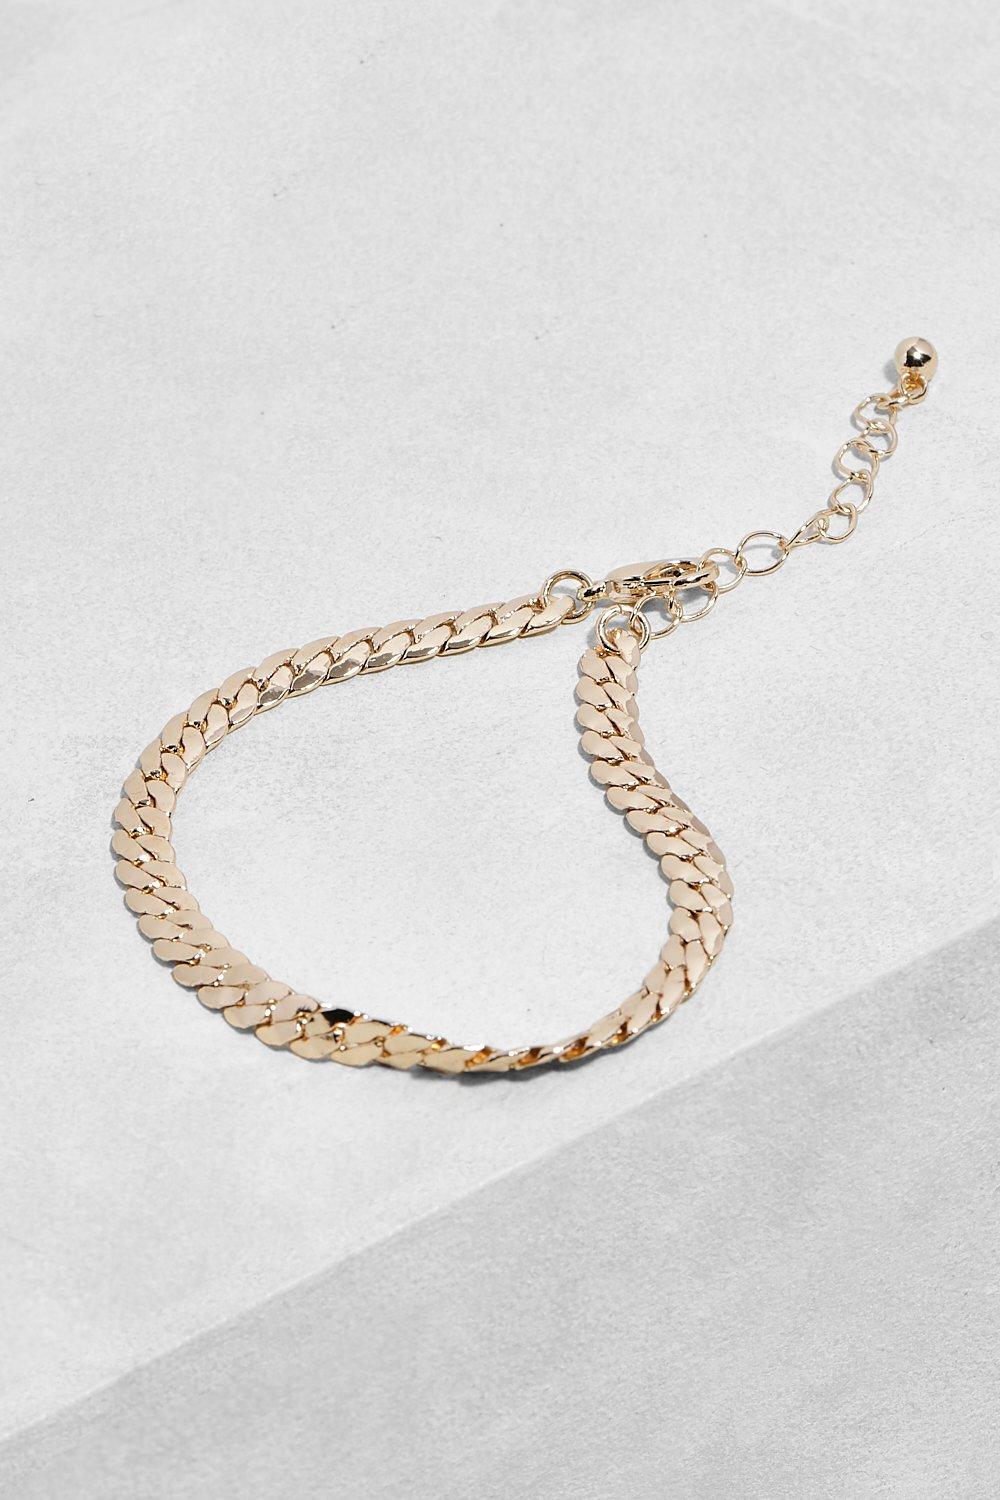 Womens Textured Snake Chain Bracelet - Gold - One Size, Gold